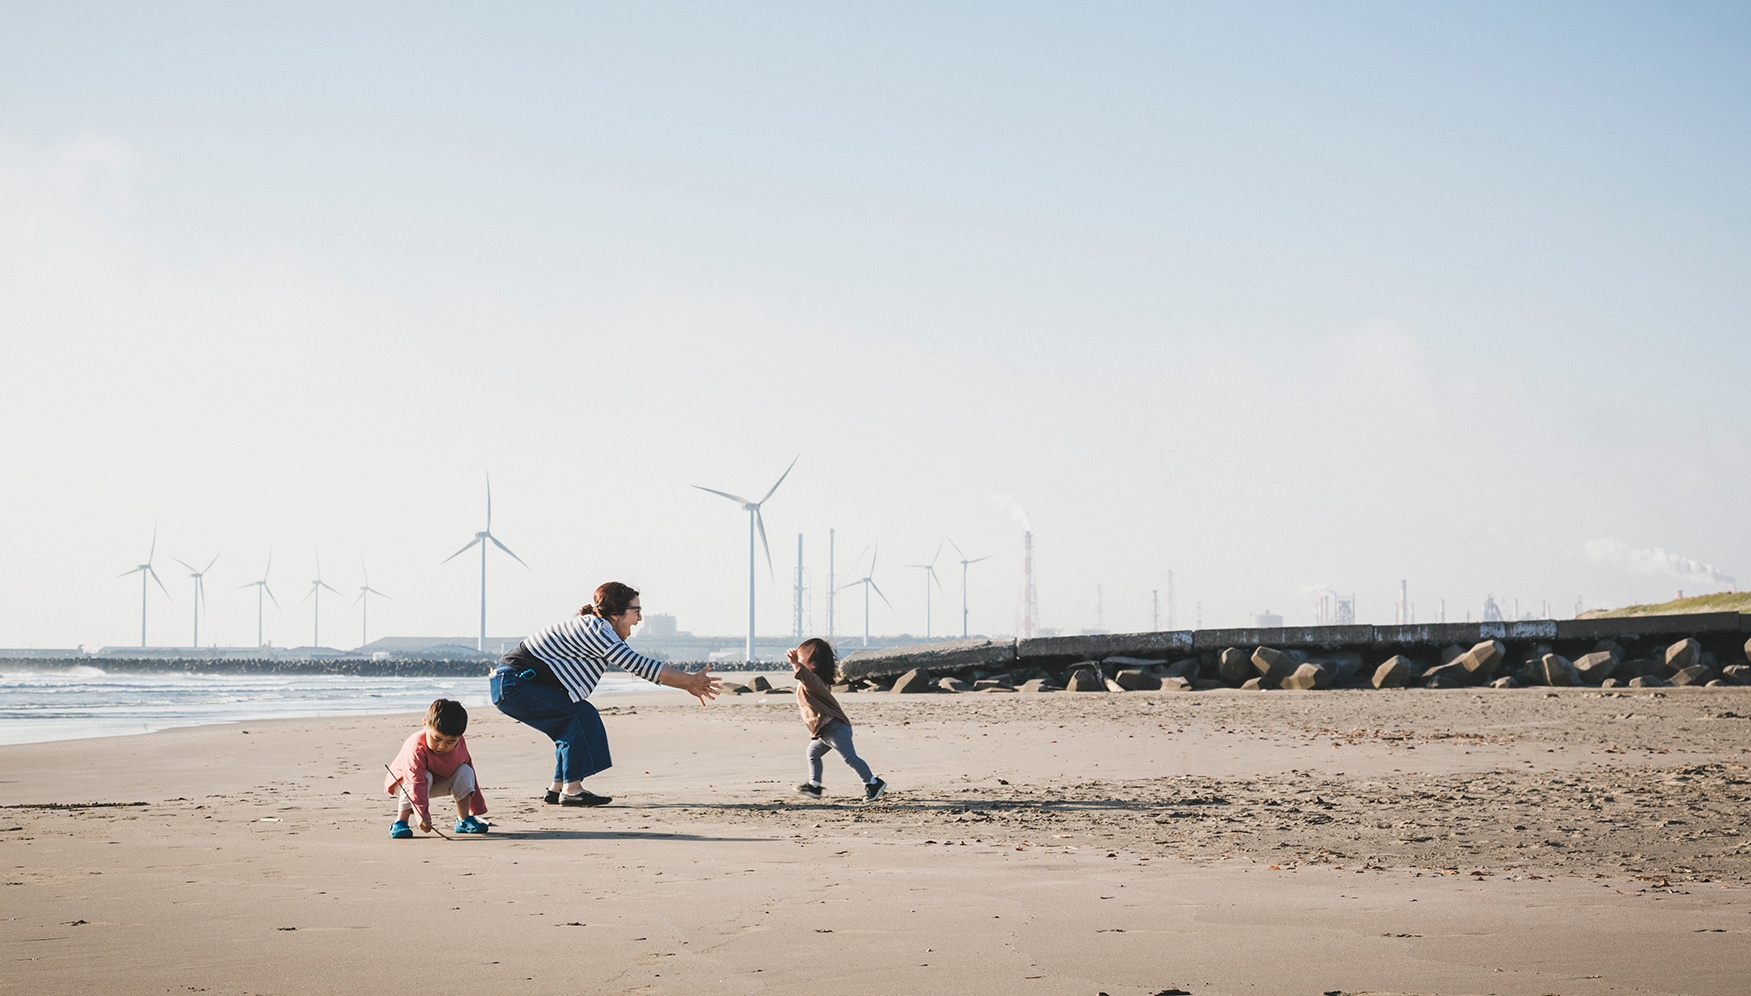 A family on the beach with wind turbines in the background